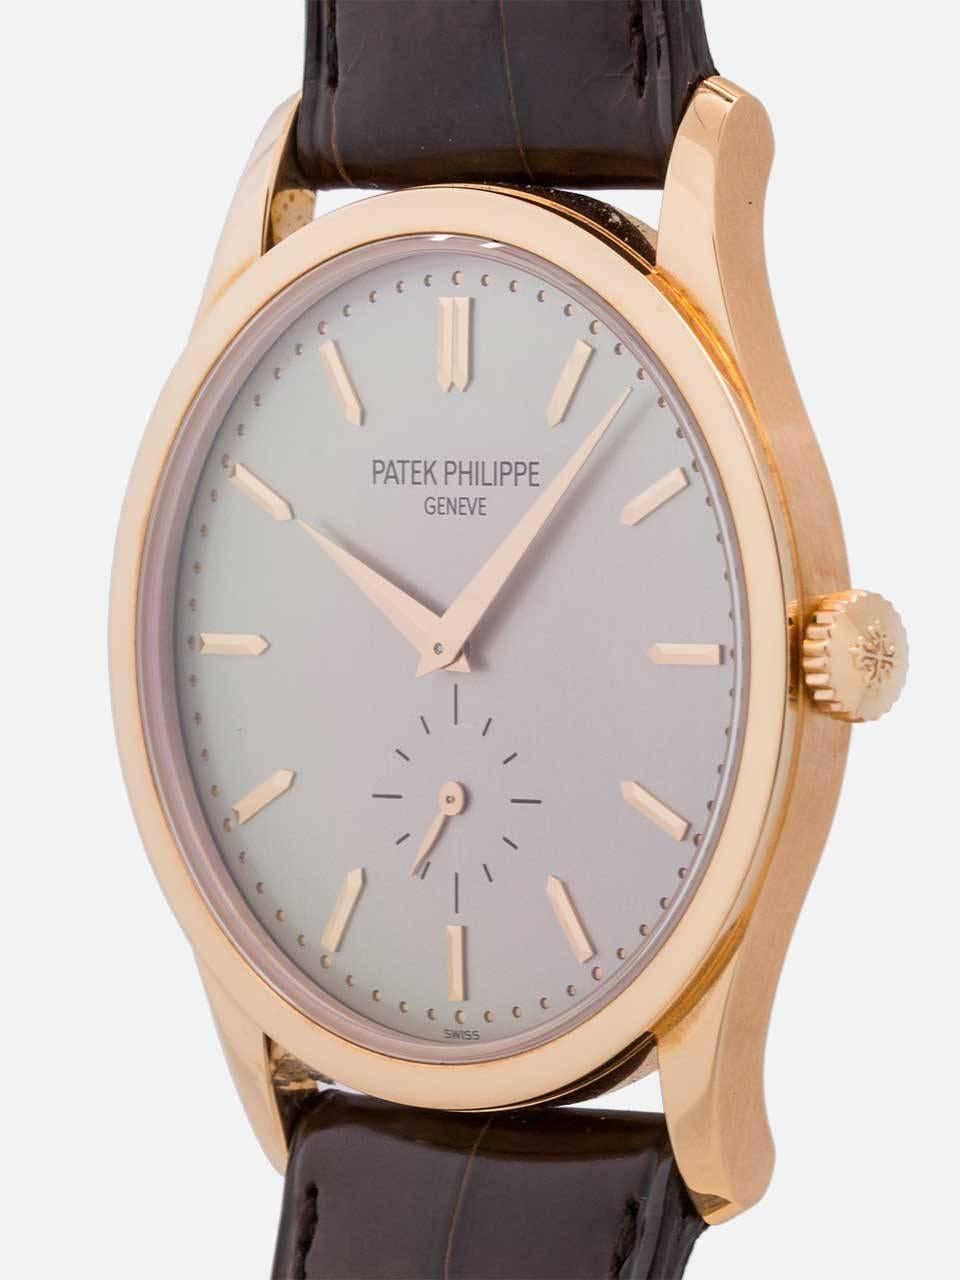 A very mint condition preowned classic Patek Philippe 18K rose gold large size Calatrava circa 2000s. Featuring a 37mm diameter case with classic 3 piece case construction, wide flat Calatrava bezel, and contoured lugs that extend from the body of